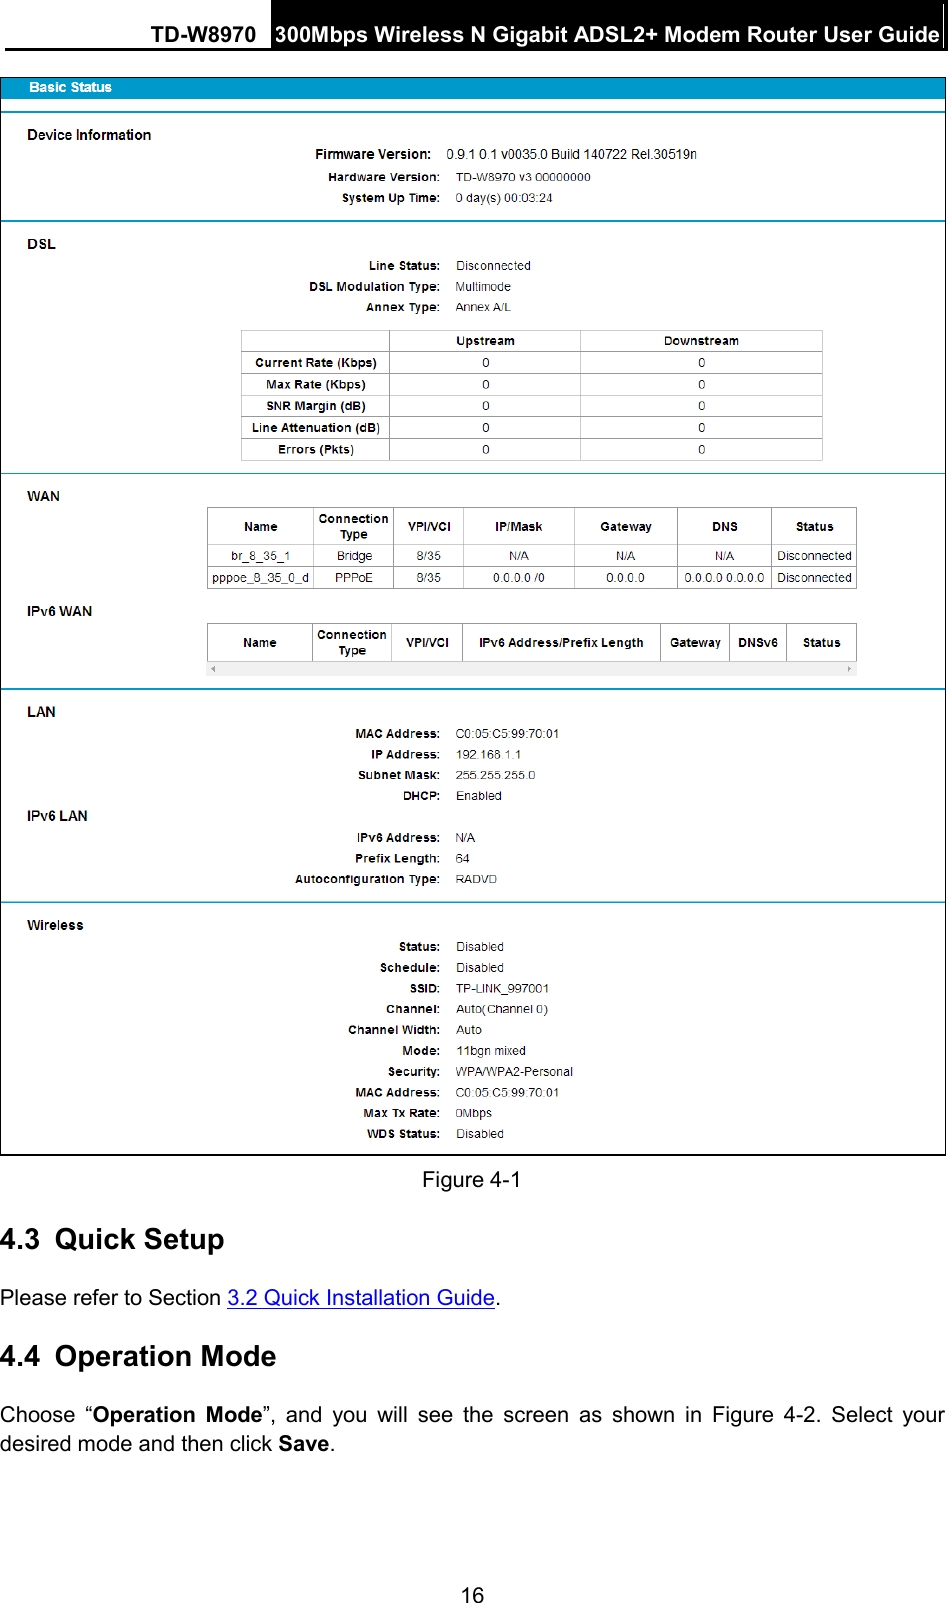 TD-W8970 300Mbps Wireless N Gigabit ADSL2+ Modem Router User Guide   Figure 4-1   4.3 Quick Setup Please refer to Section 3.2 Quick Installation Guide. 4.4 Operation Mode Choose “Operation Mode”, and you will see the screen as shown in Figure  4-2. Select your desired mode and then click Save. 16 